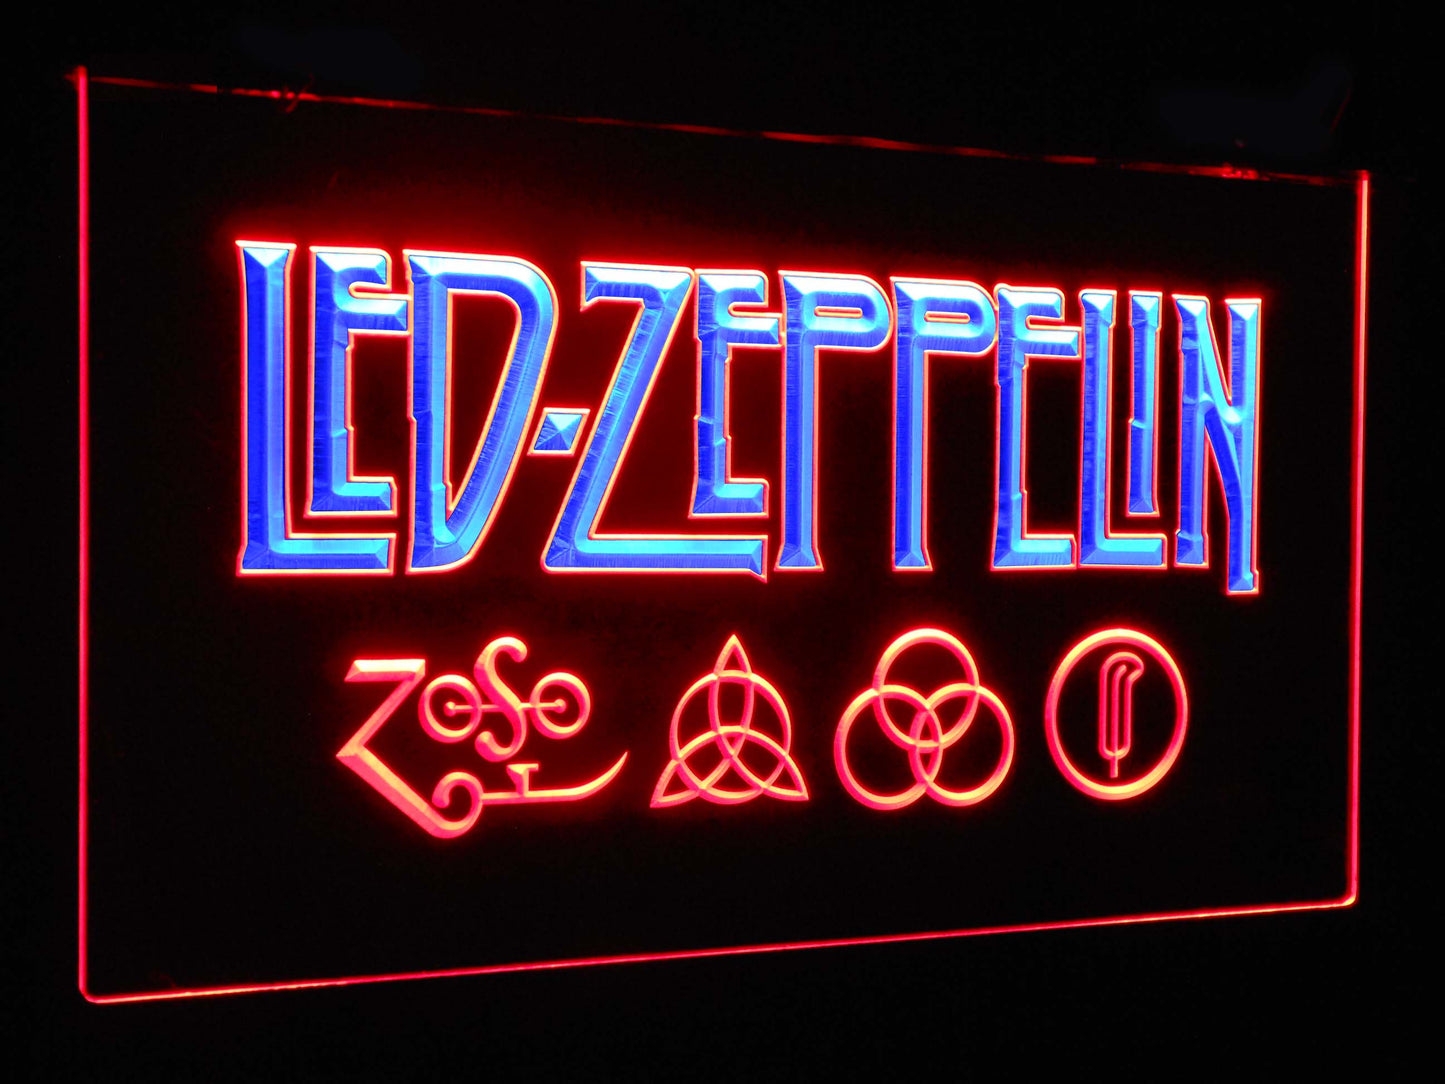 Led Zeppelin Band Music Bar Decoration Gift Dual Color Led Neon Light Signs st6-c0002 by Woody Signs Co. - Handmade Crafted Unique Wooden Creative